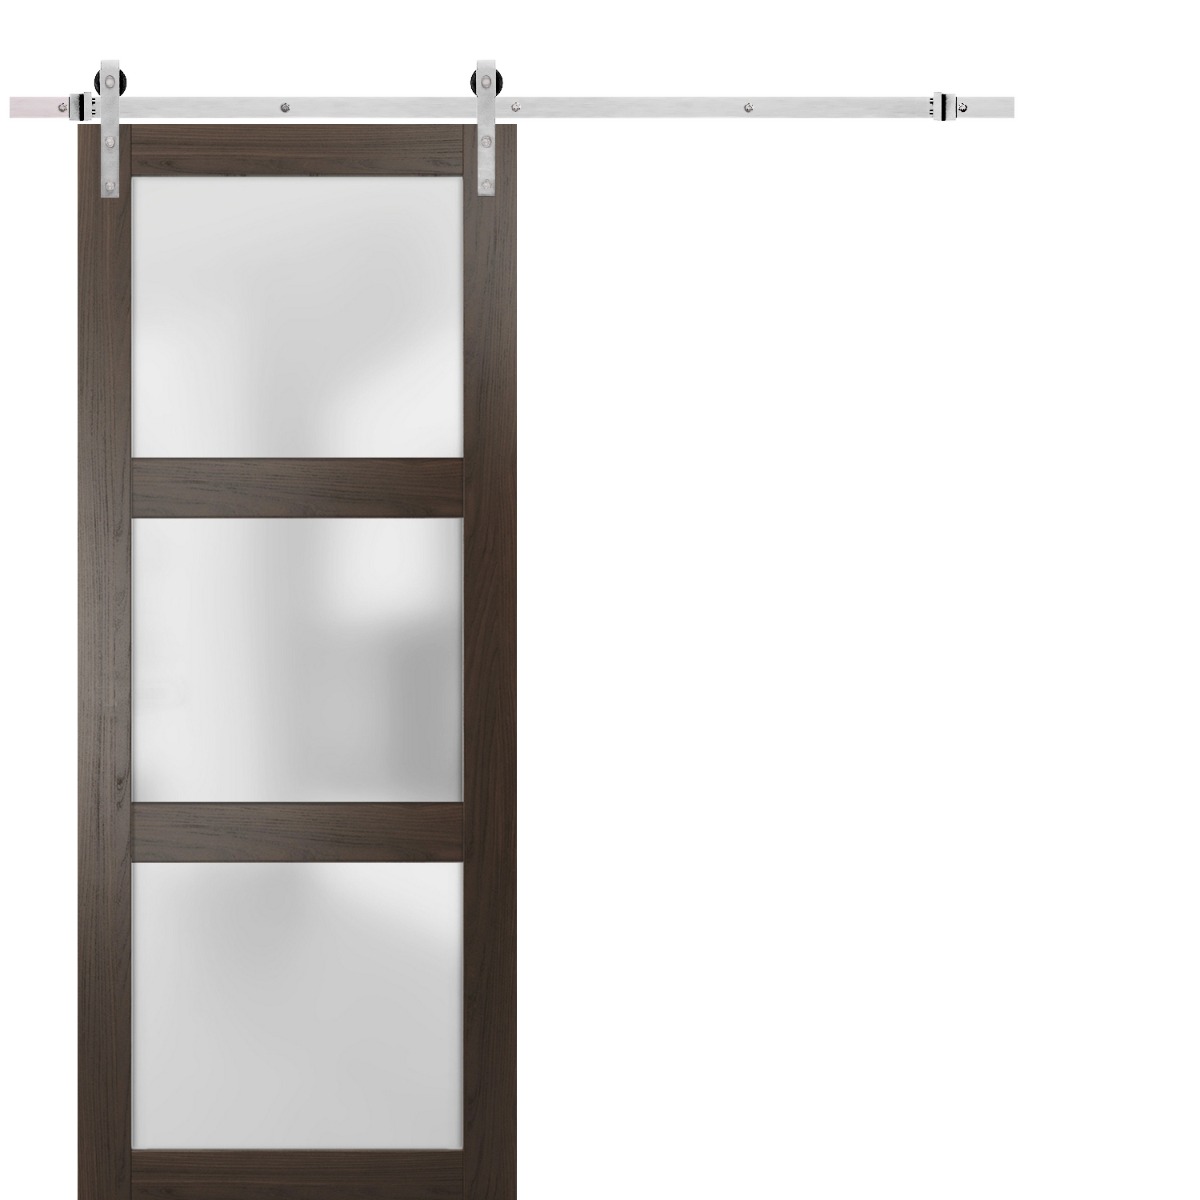 Sturdy Barn Door Frosted Glass | Lucia 2552 Chocolate Ash | 6.6FT Rail Hangers Heavy Hardware Set | Solid Panel Interior Doors-36